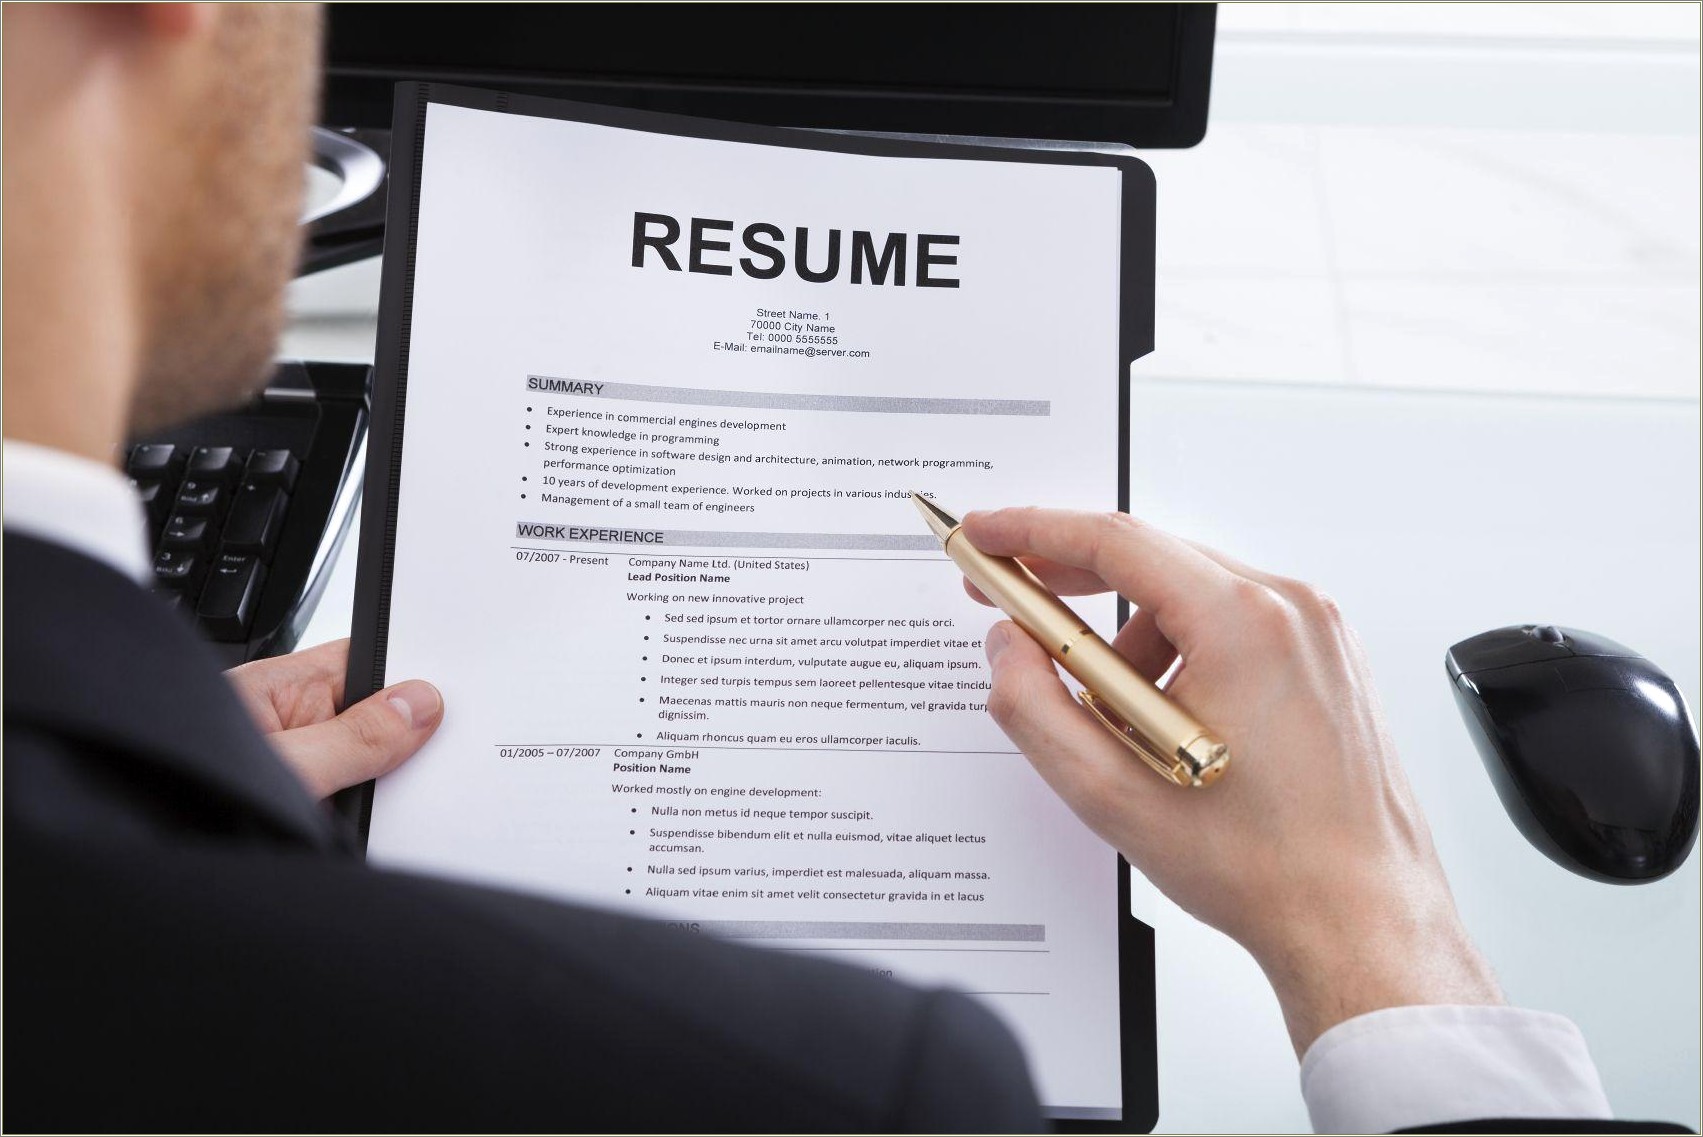 Bullet Point Words For Sales Position In Resume